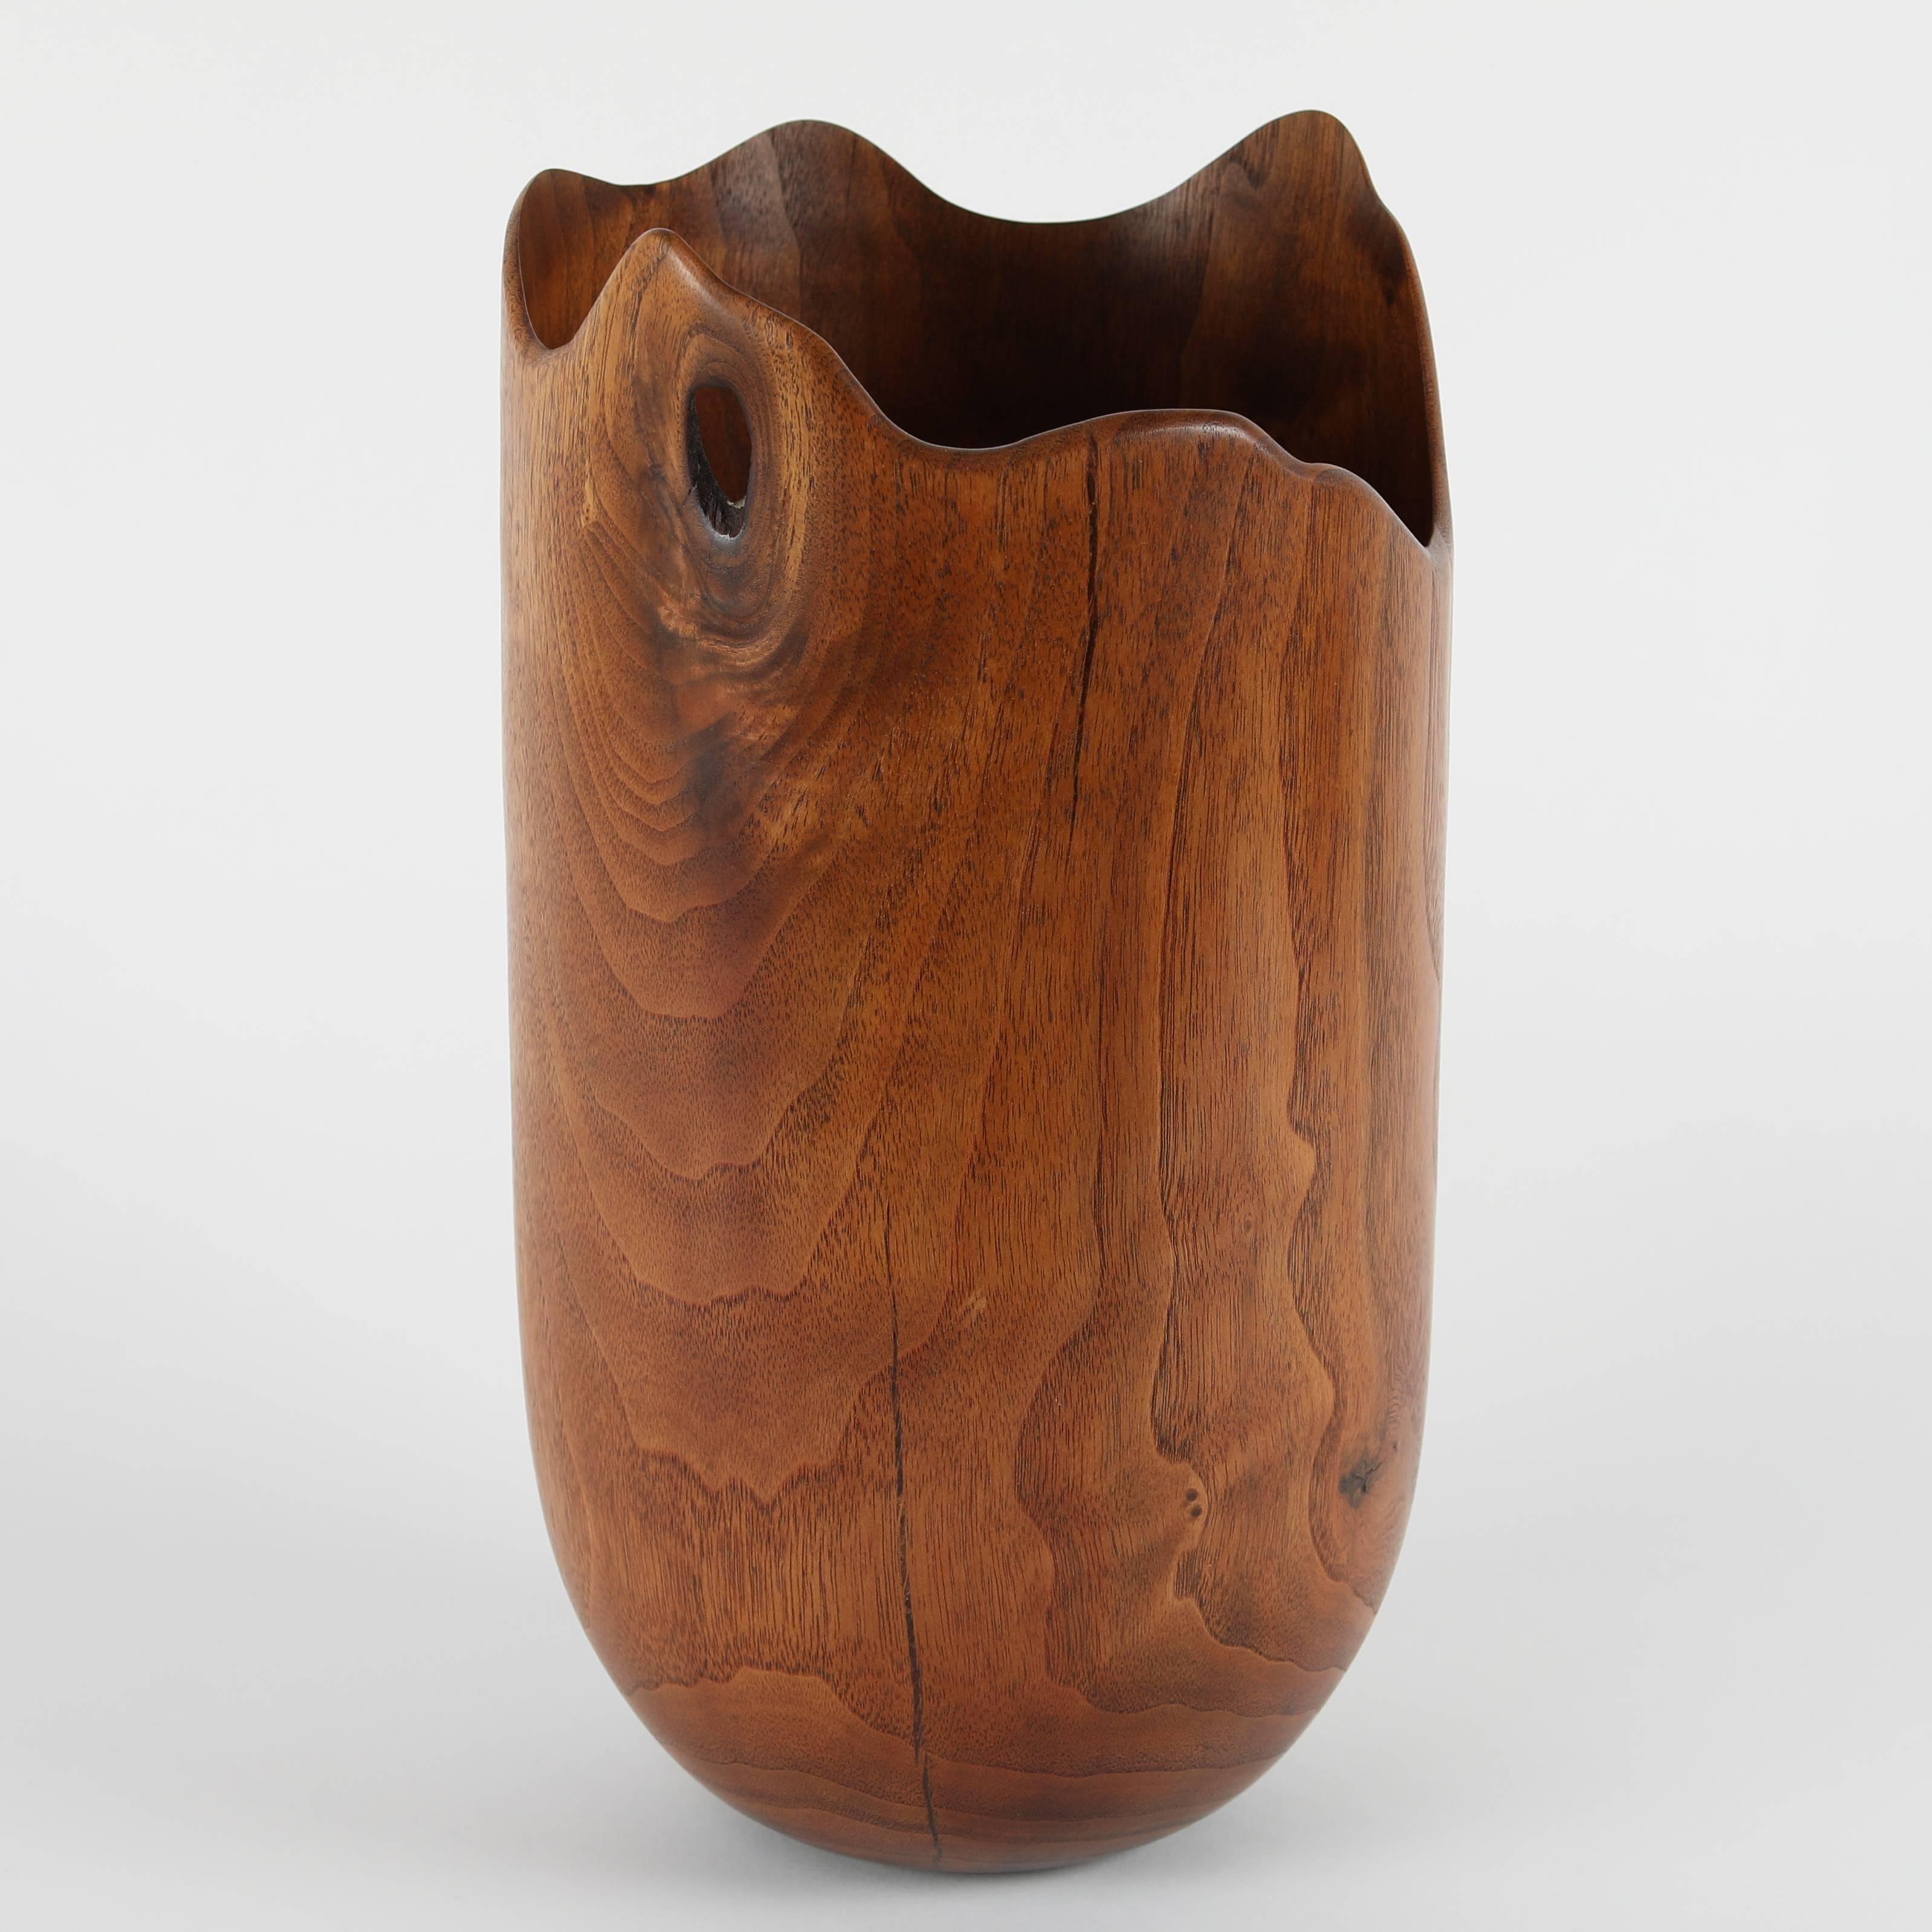 Lovely wood vase carved from American black walnut. The simple form showcases the rich, expressive grain and warm tones of the walnut. Free-form top edge with a hole in the center of a knot. Bottom etched 